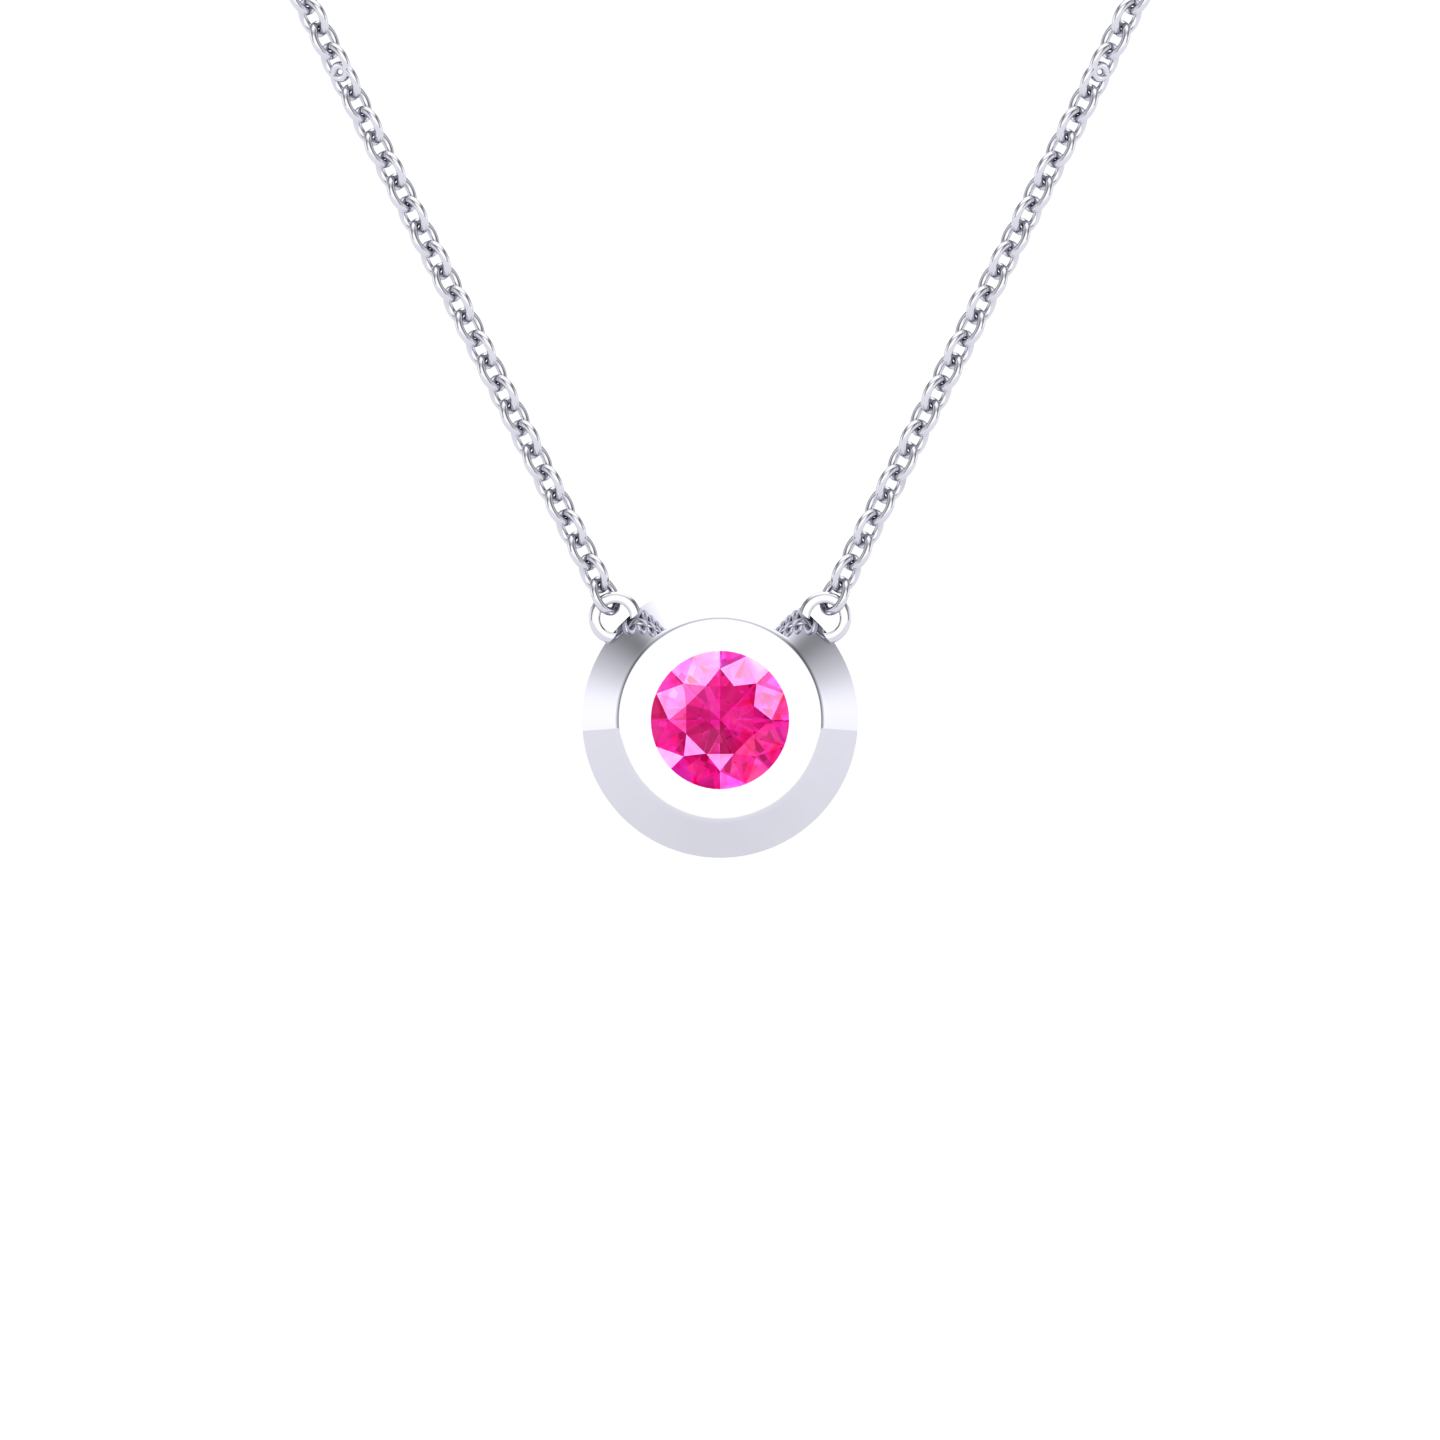 Beautlace 925 Sterling Silver October Birthstone Necklace,Tiny Hearts Love  Pendant Women Small Oct. Tourmaline Heart Stone Birth Necklace,Birthday  Gift Present Minimalist Jewelry - Walmart.com